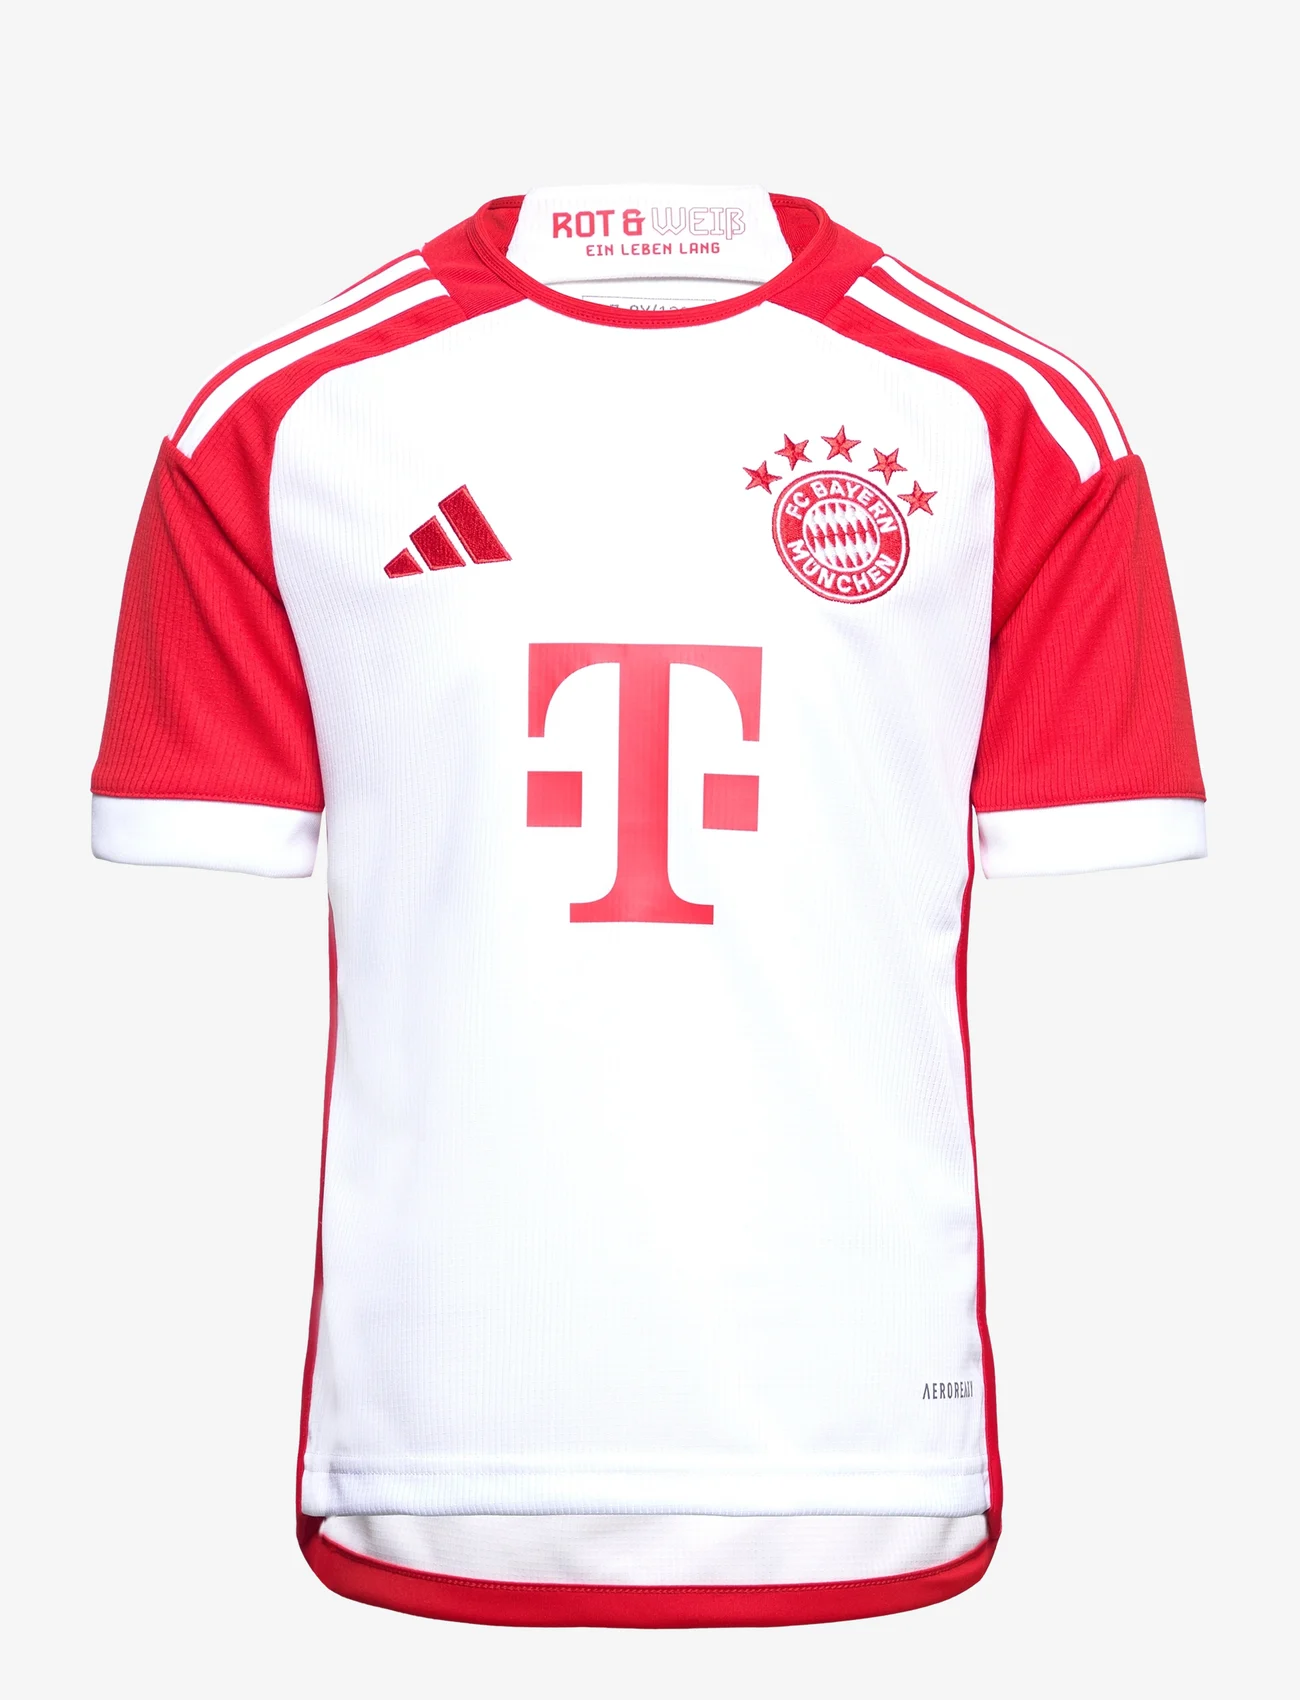 adidas Performance - FC Bayern 23/24 Home Jersey Kids - voetbalshirts - white/red - 0